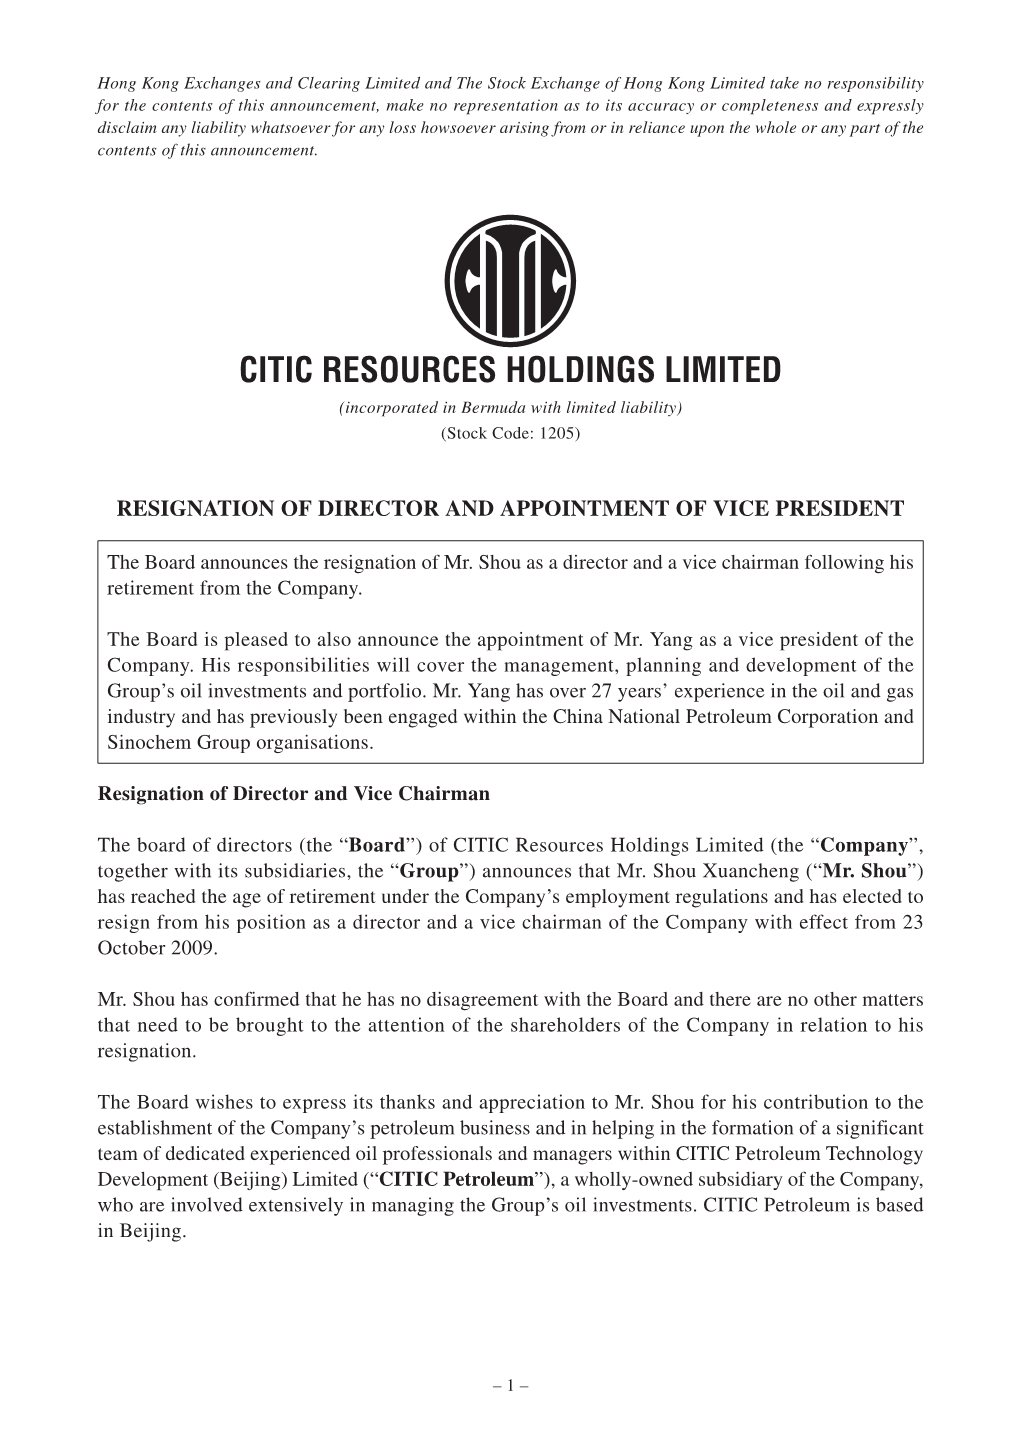 CITIC RESOURCES HOLDINGS LIMITED (Incorporated in Bermuda with Limited Liability) (Stock Code: 1205)